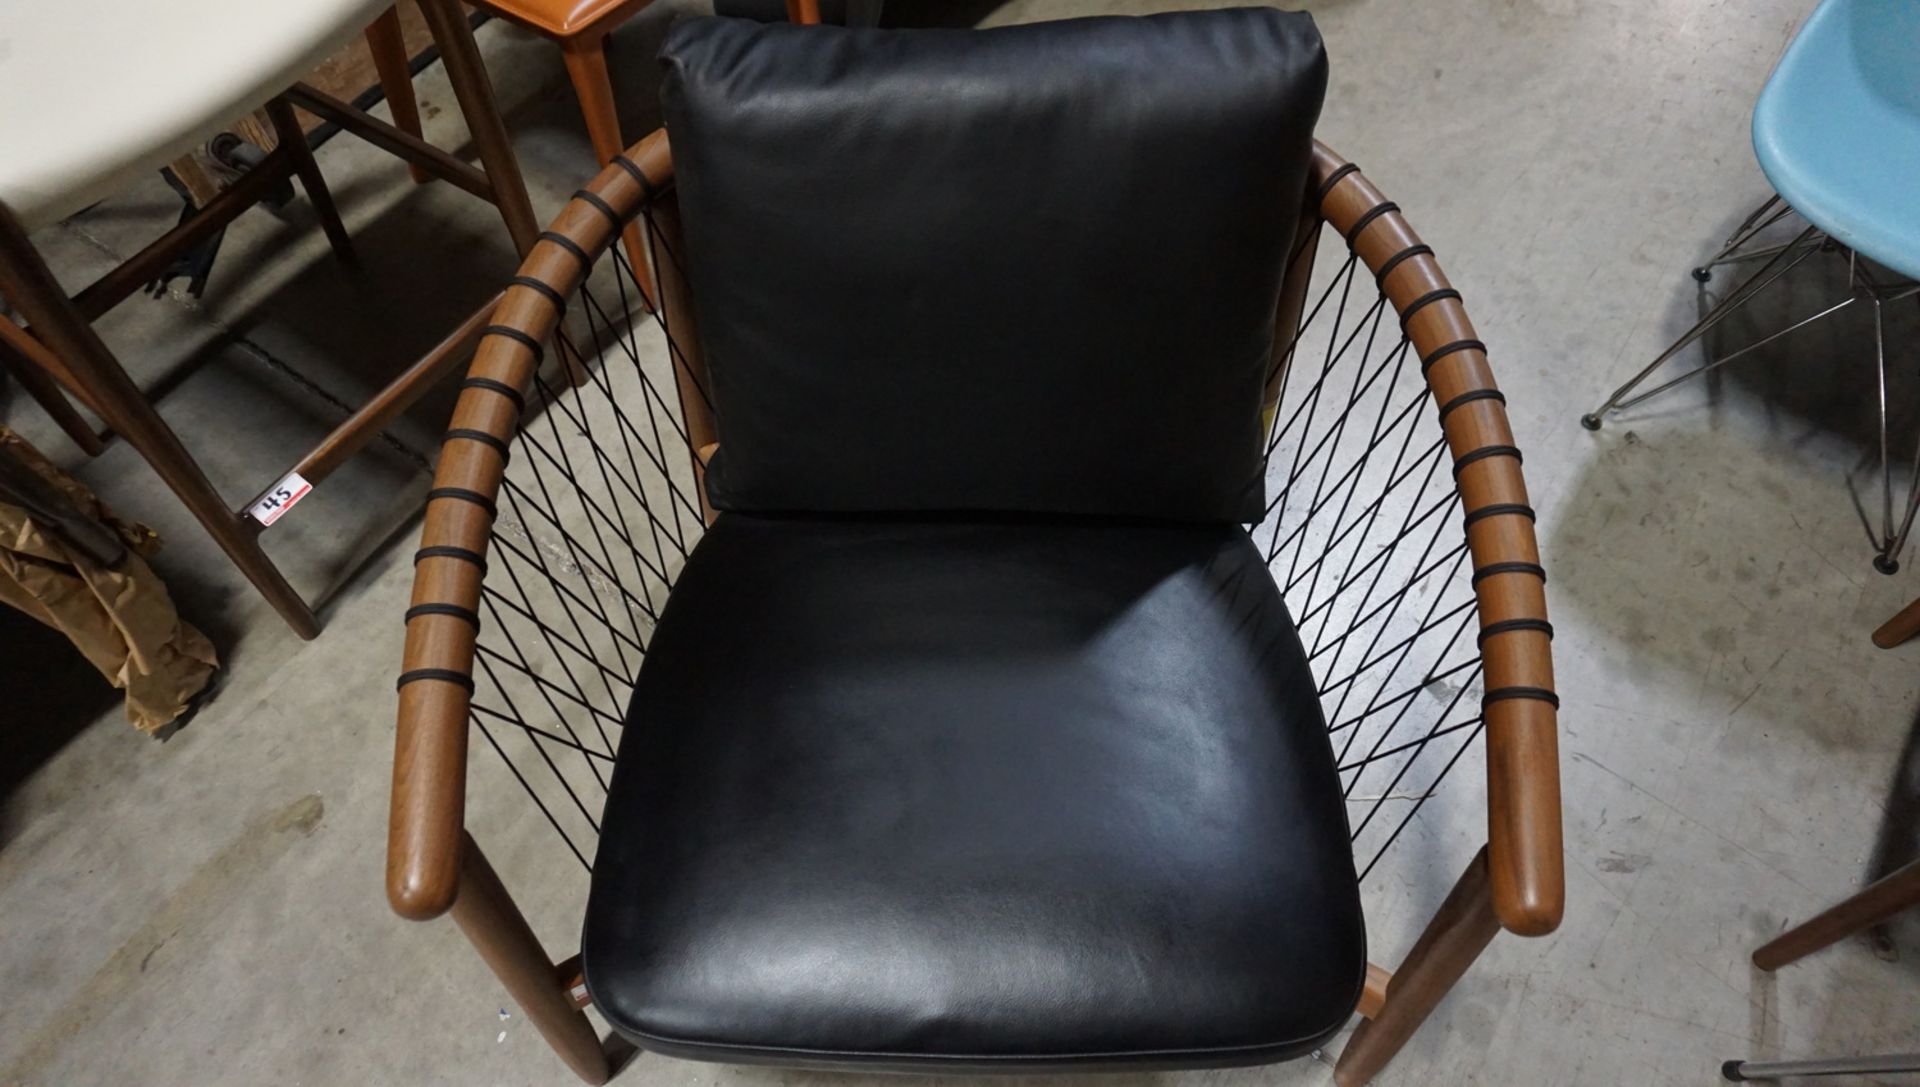 HERMAN MILLER CROSSHATCH CHAIR, WALNUT FINISH W/ BLACK CORD, & BLACK LEATHER CUSHIONS ($5,245 MSRP) - Image 3 of 3